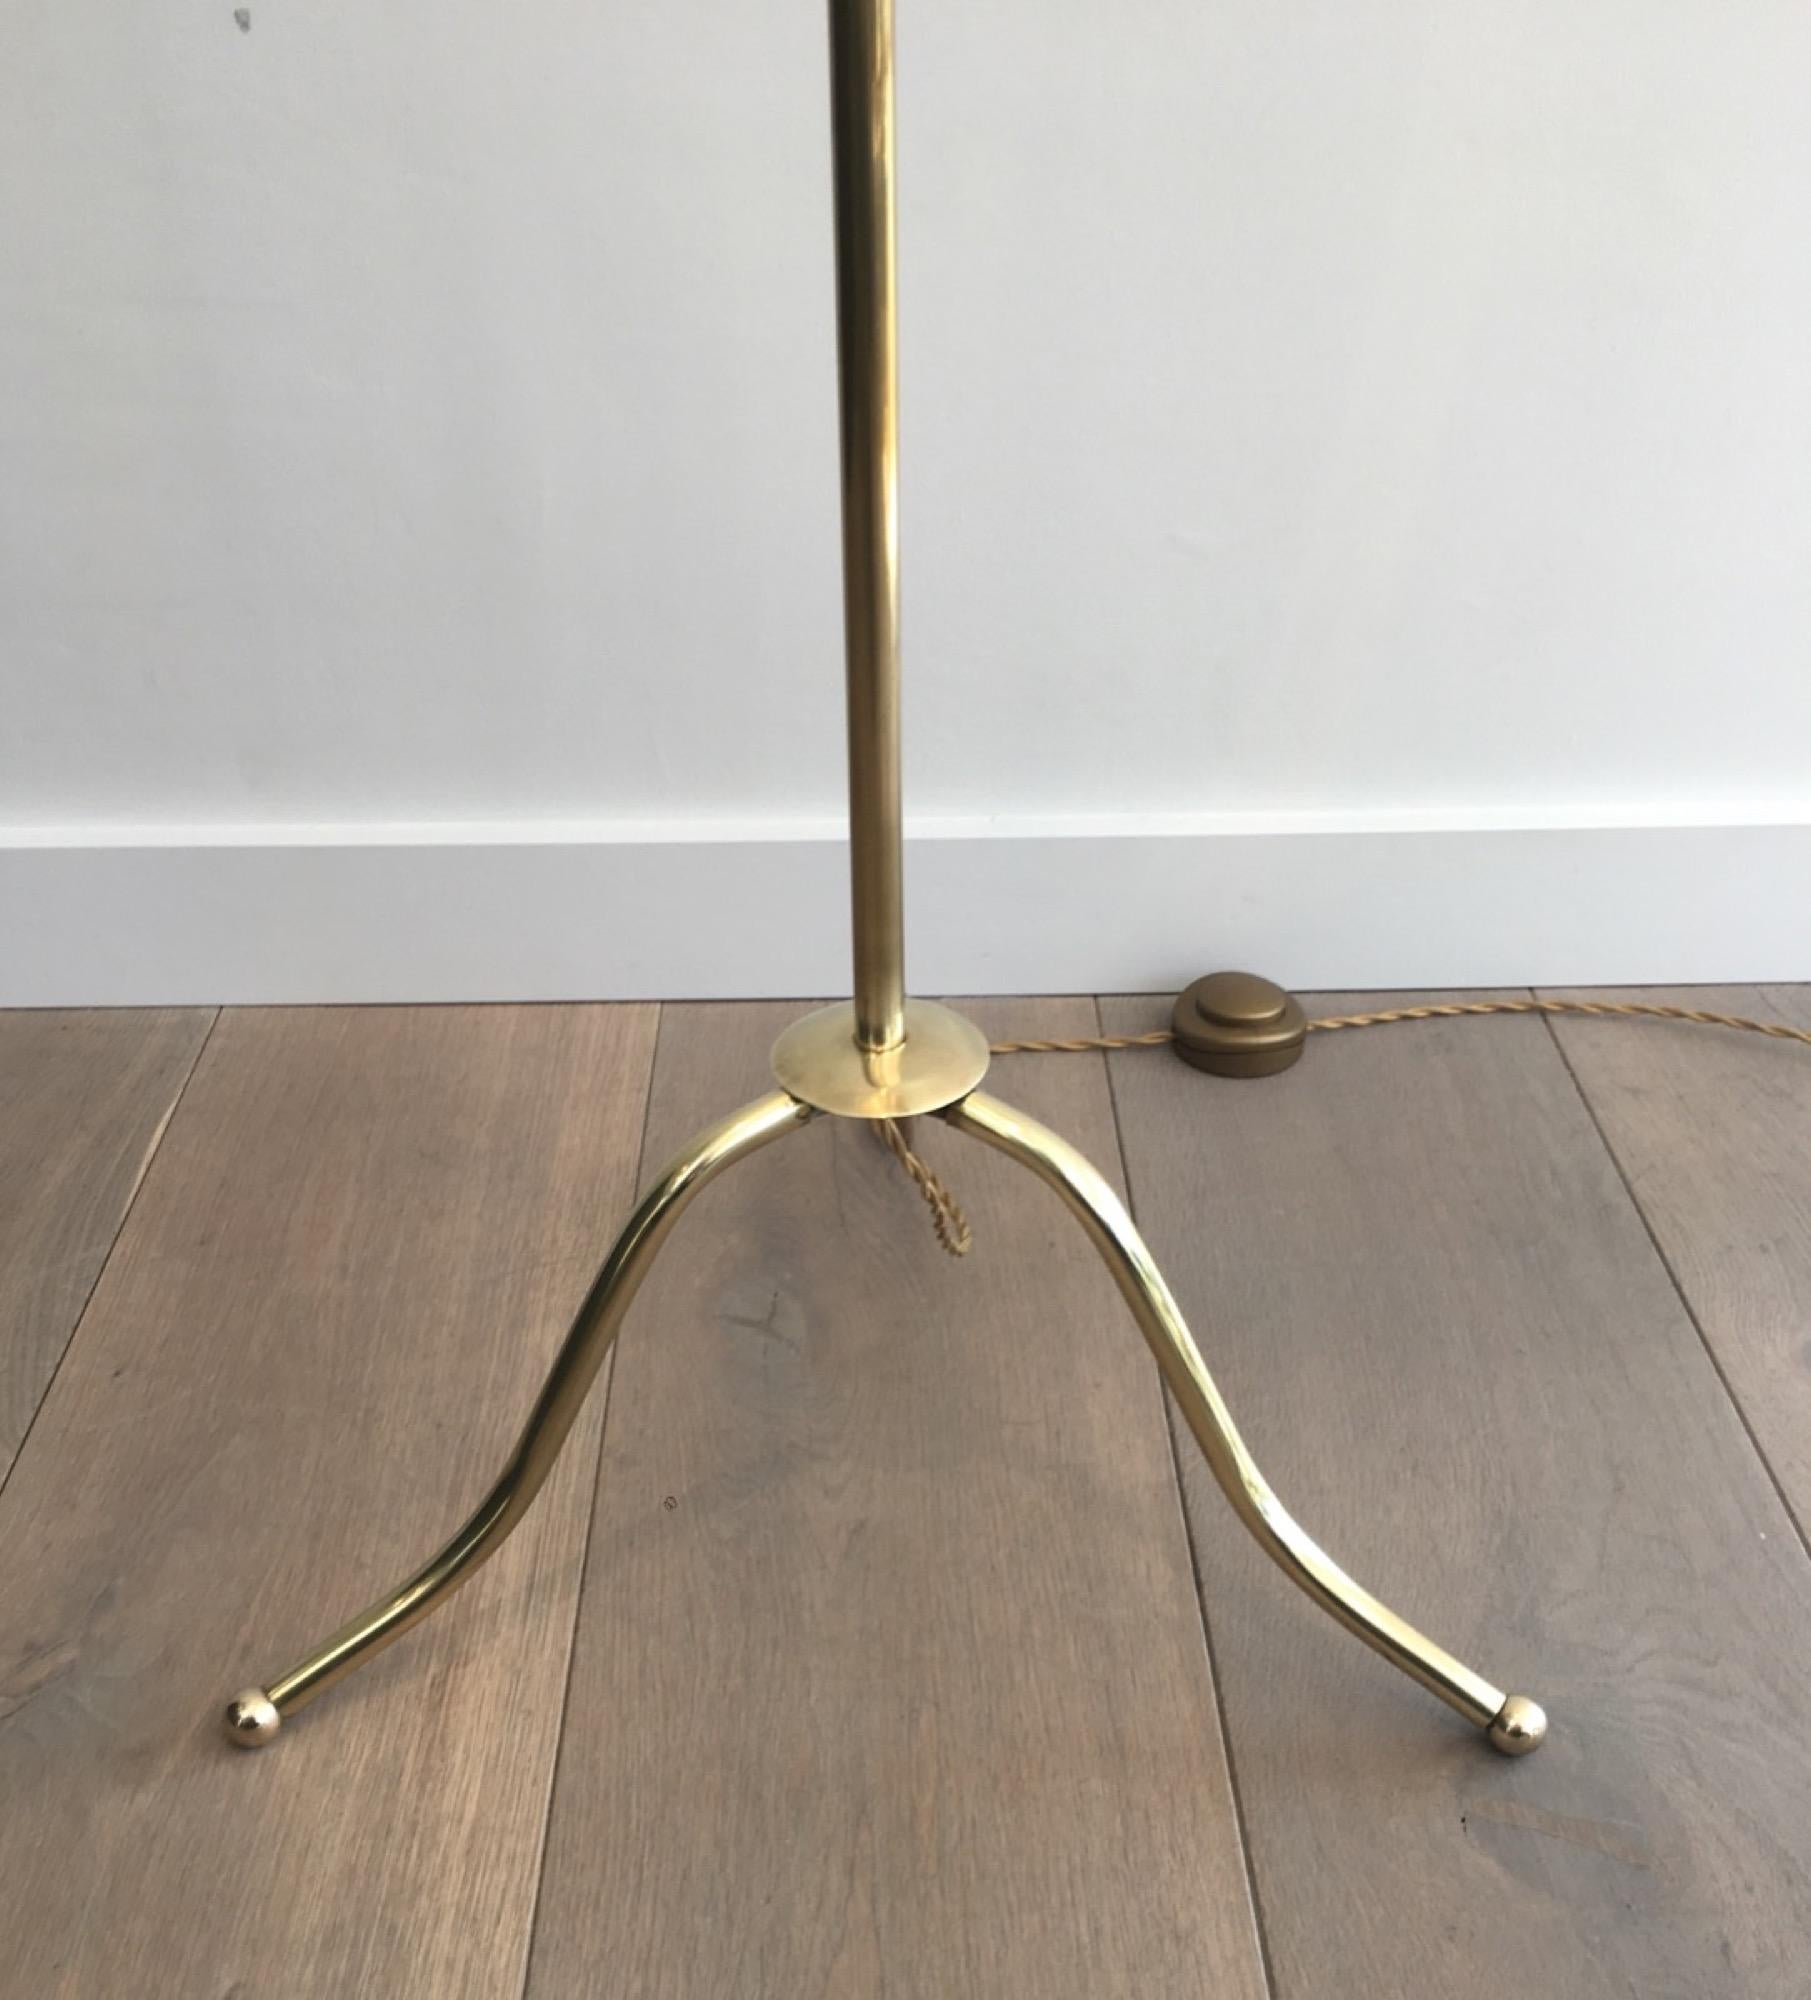 Mid-20th Century Neoclassical Tripode Brass Floor Lamp with Shade, French, circa 1940